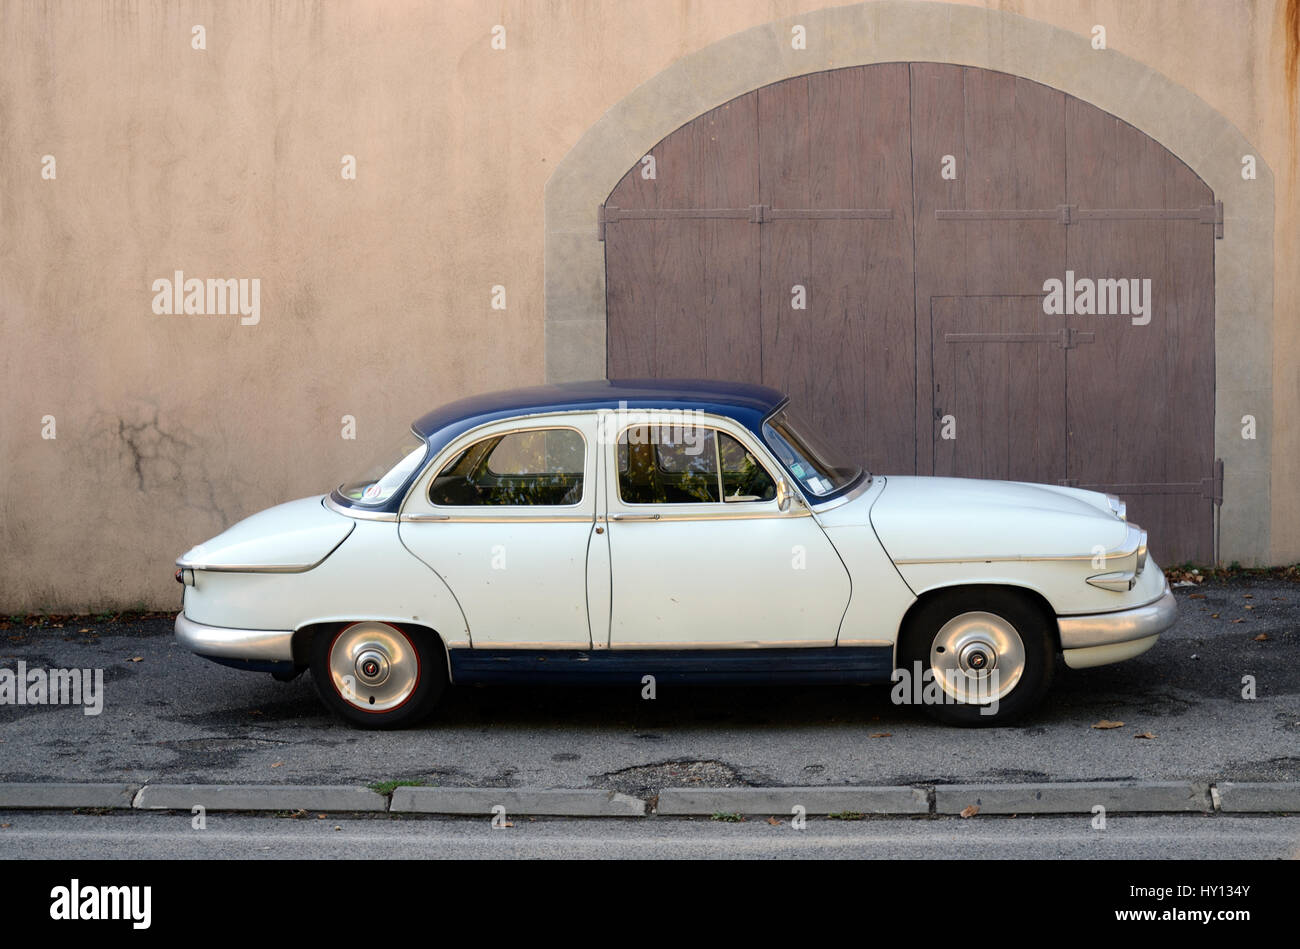 French Veteran or Vintage Panhard PL17 Car or Automobile Produced Between 1959 and 1965 Stock Photo